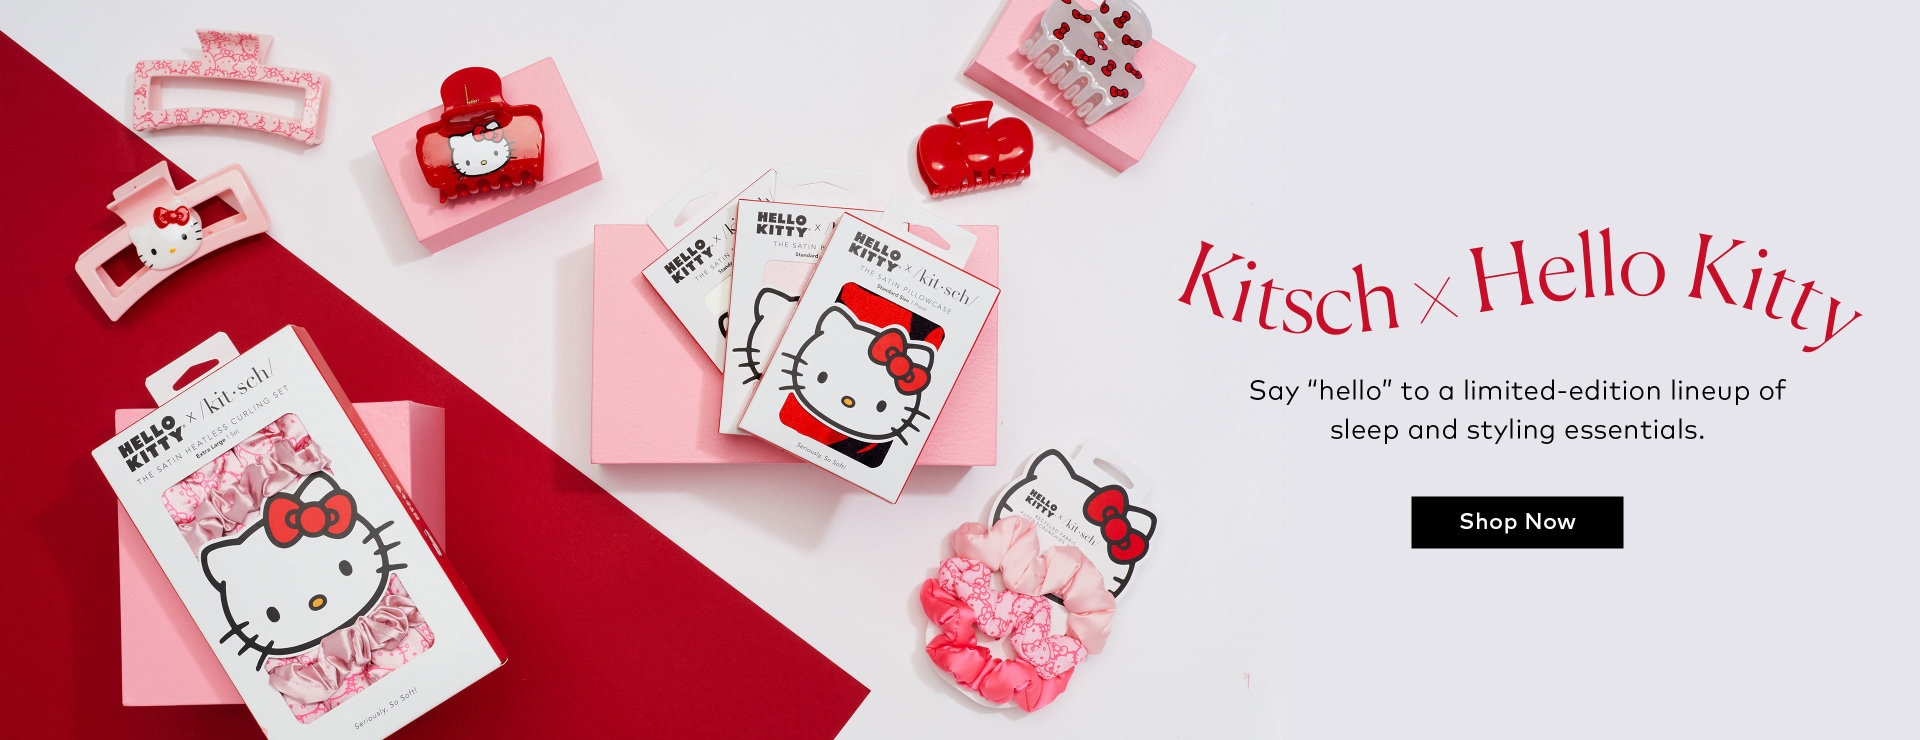 Shop the Kitsch x Hello Kitty Collection at Beautylish.com